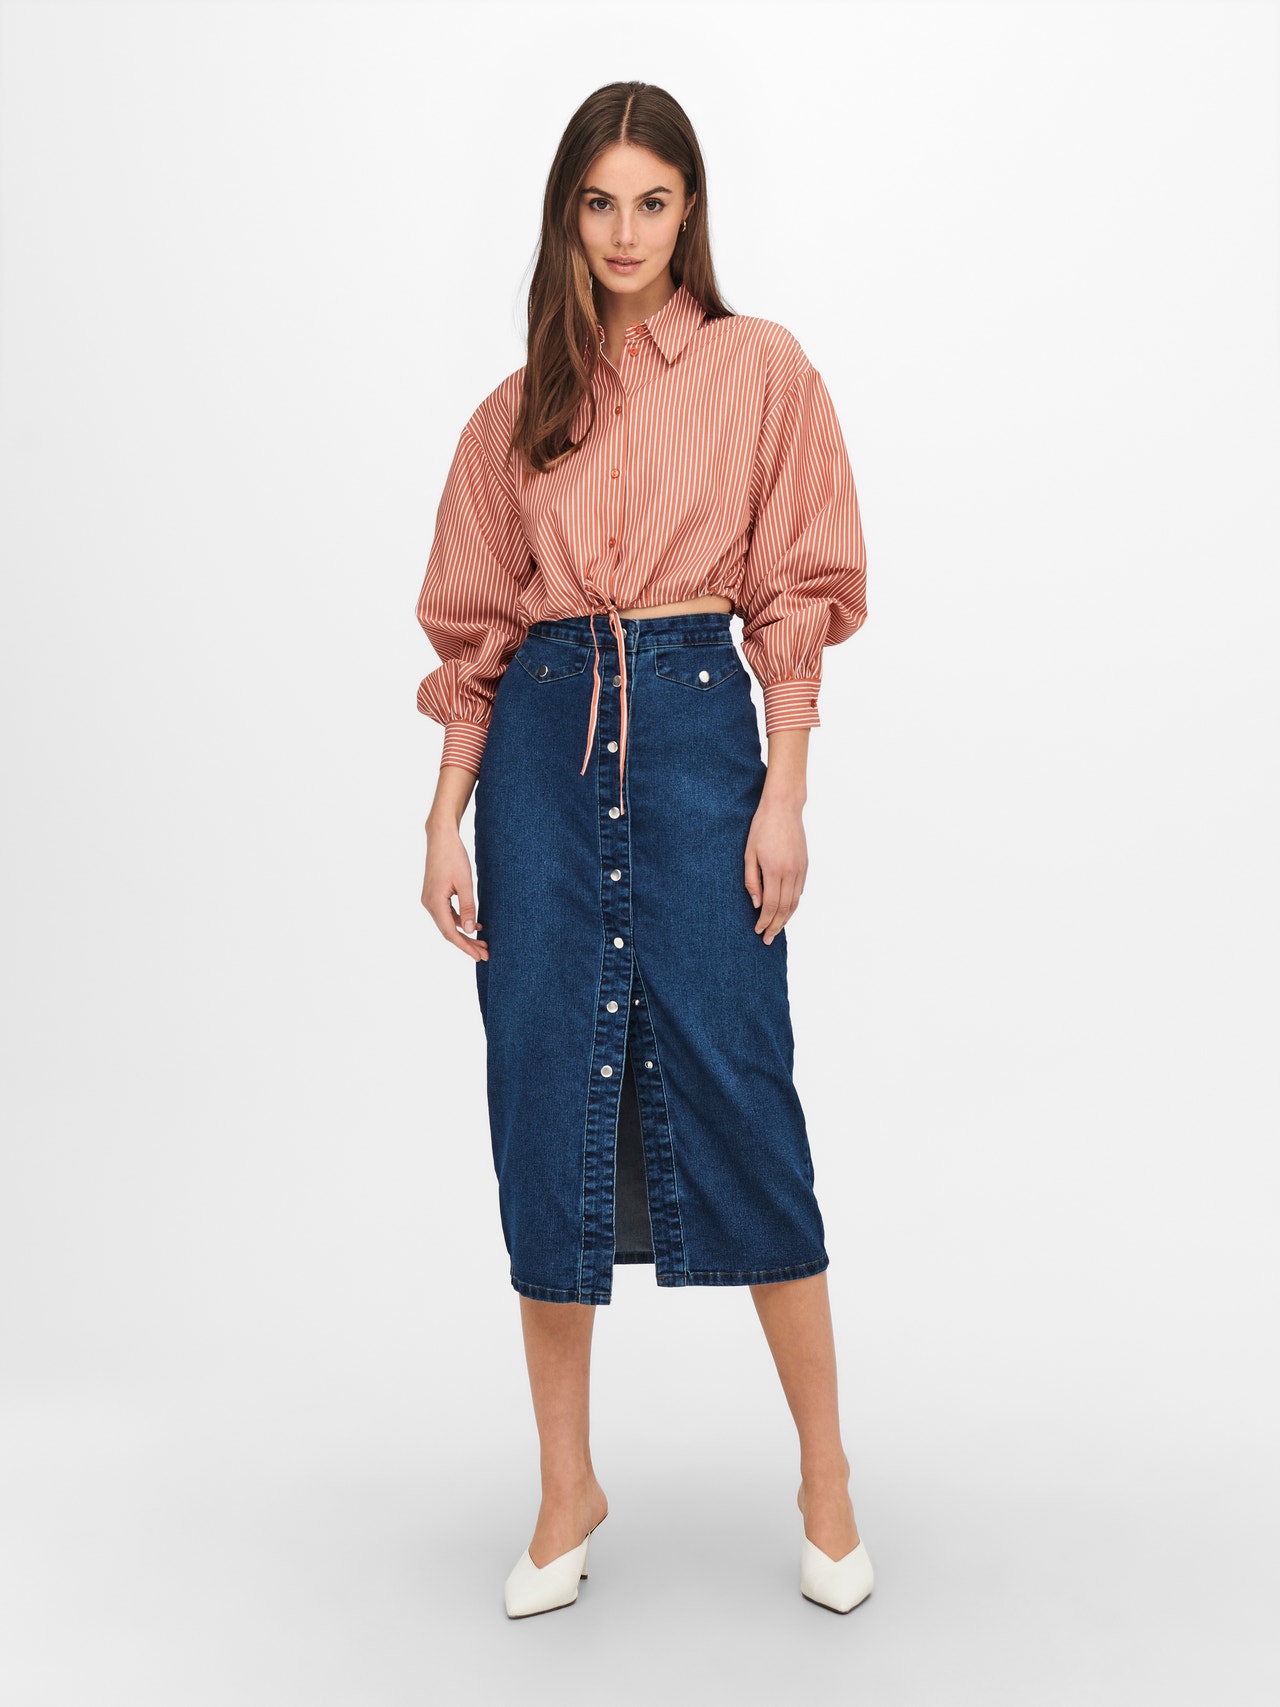 ONLY Cropped Shirt -Spice Route - 15252144